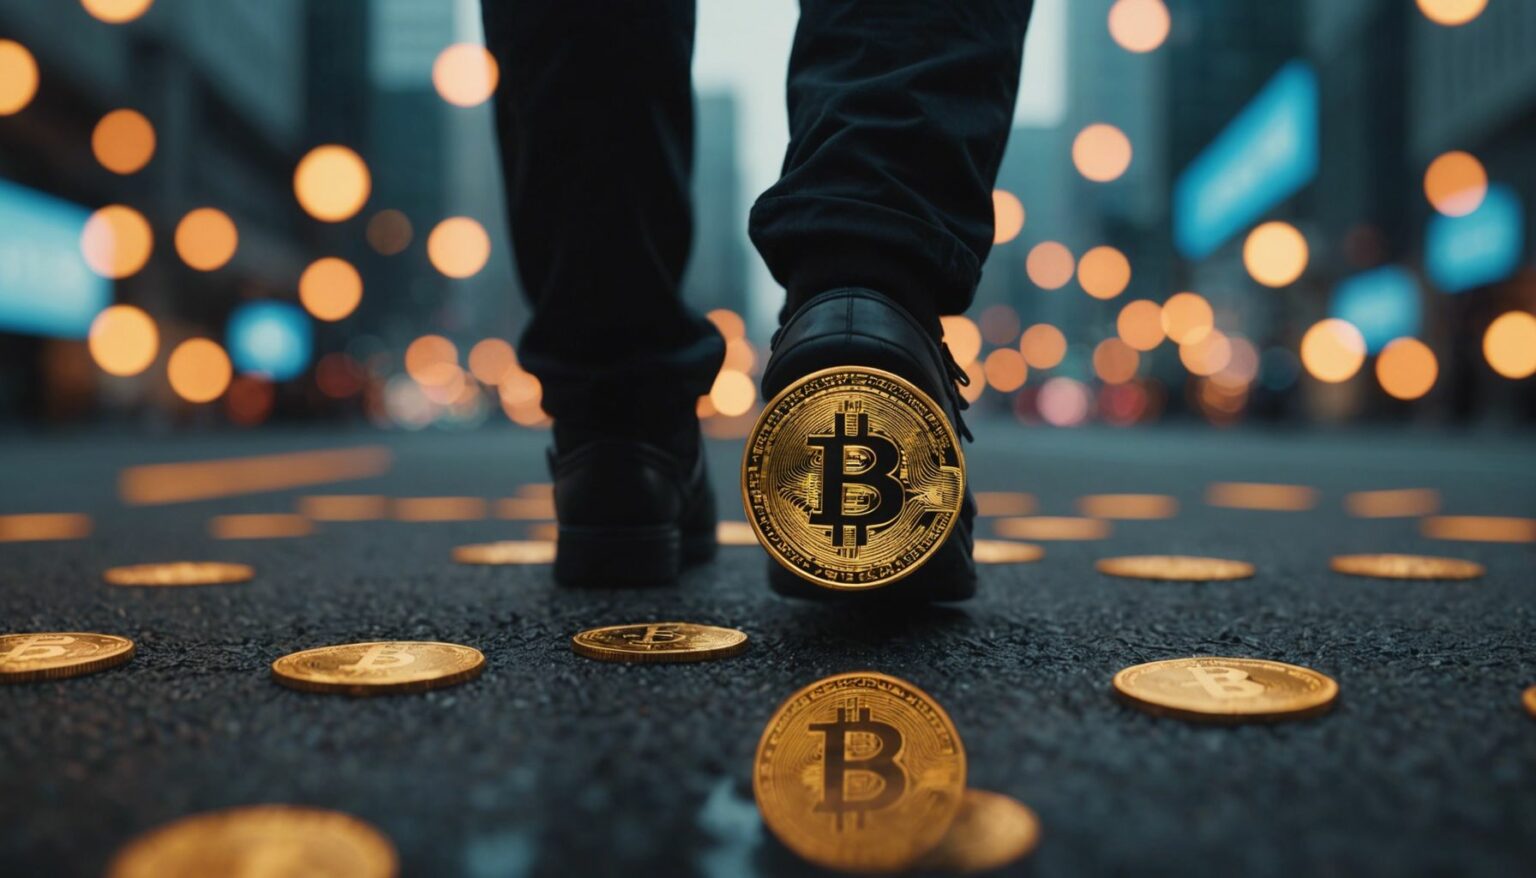 Person stepping into a digital world with Bitcoin and Ethereum symbols, representing the start of cryptocurrency investing.